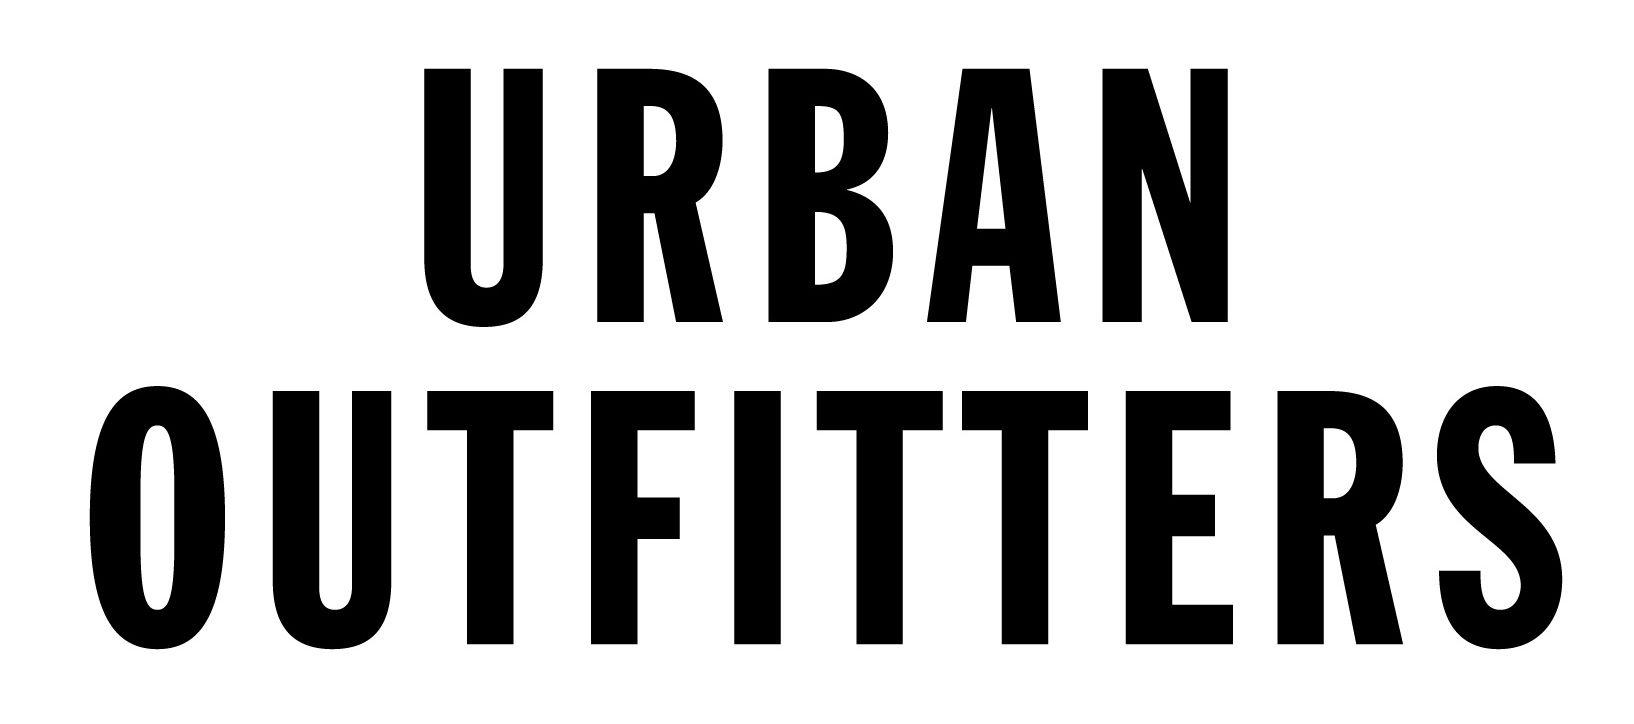 Urban Outfitters Logo - Urban Outfitters Customer Service Contact Number and Review: 0845 ...